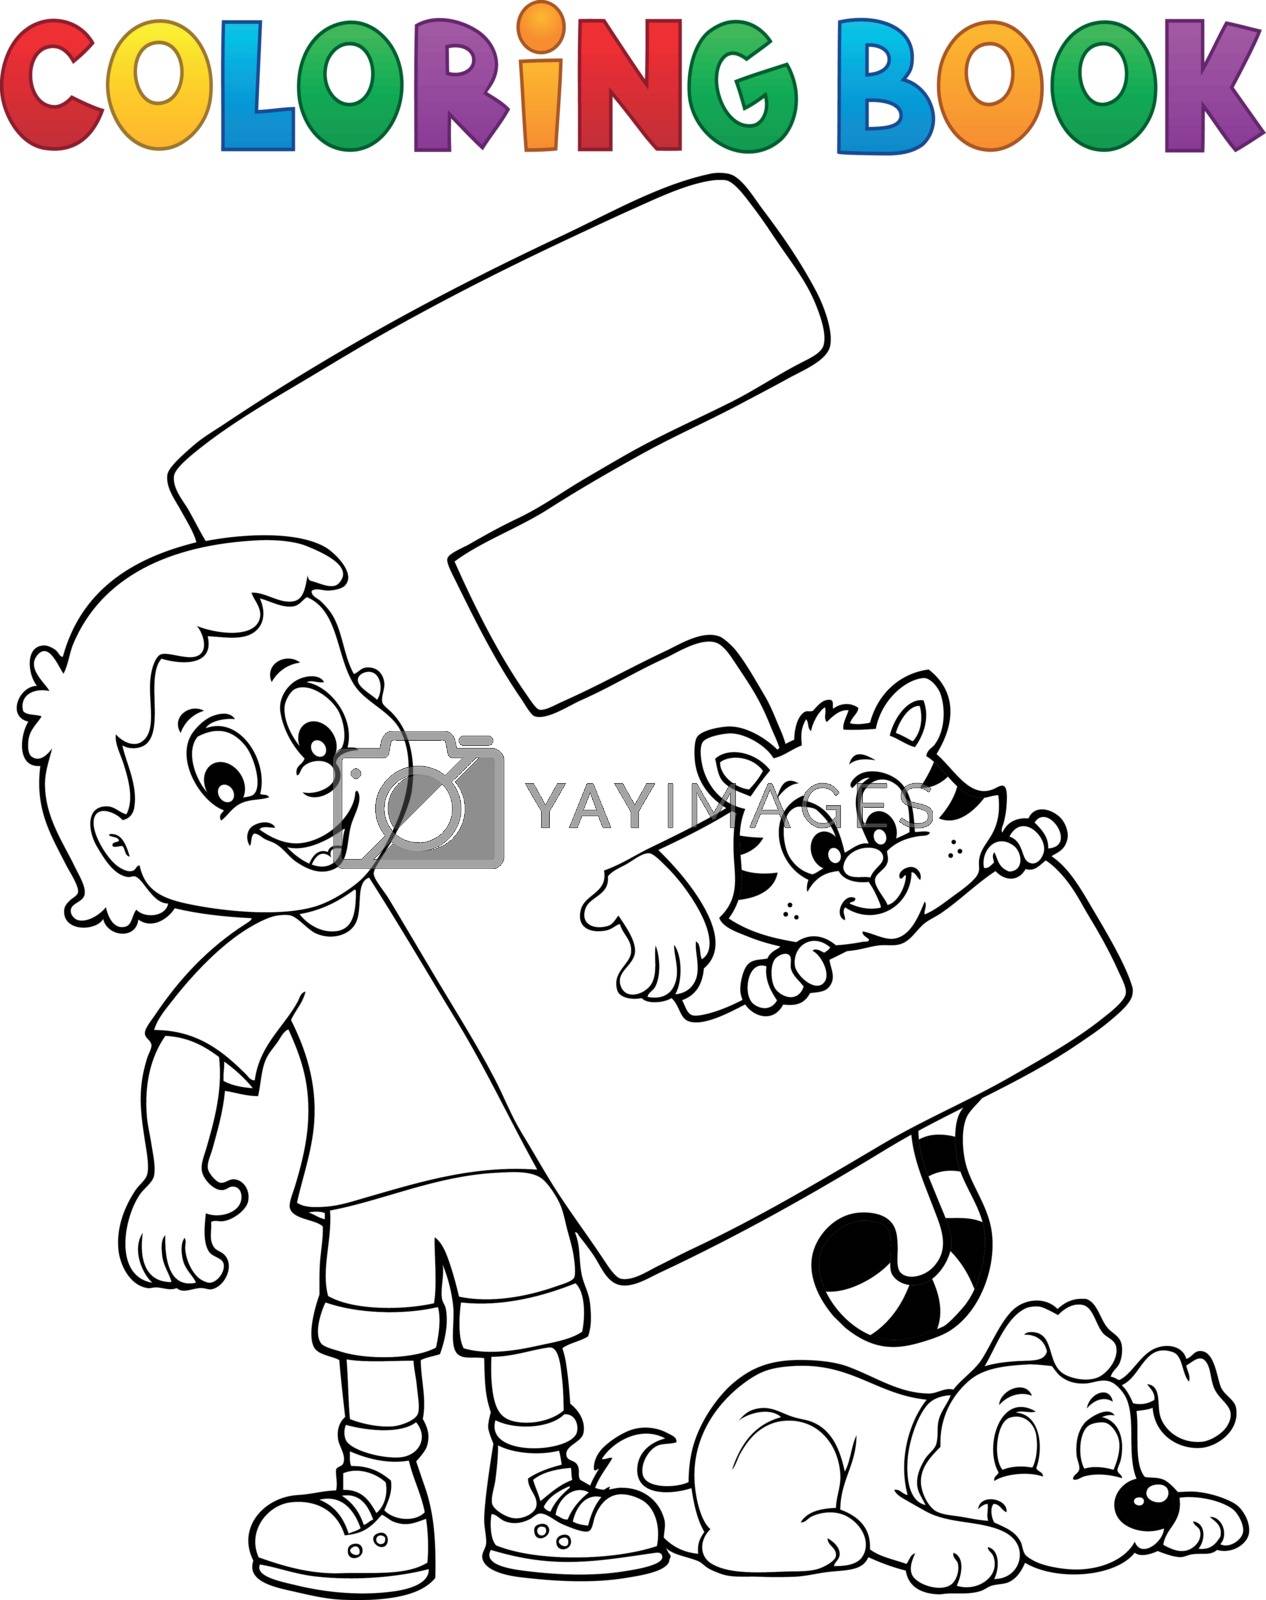 Coloring book boy and pets by letter E - eps10 vector illustration.